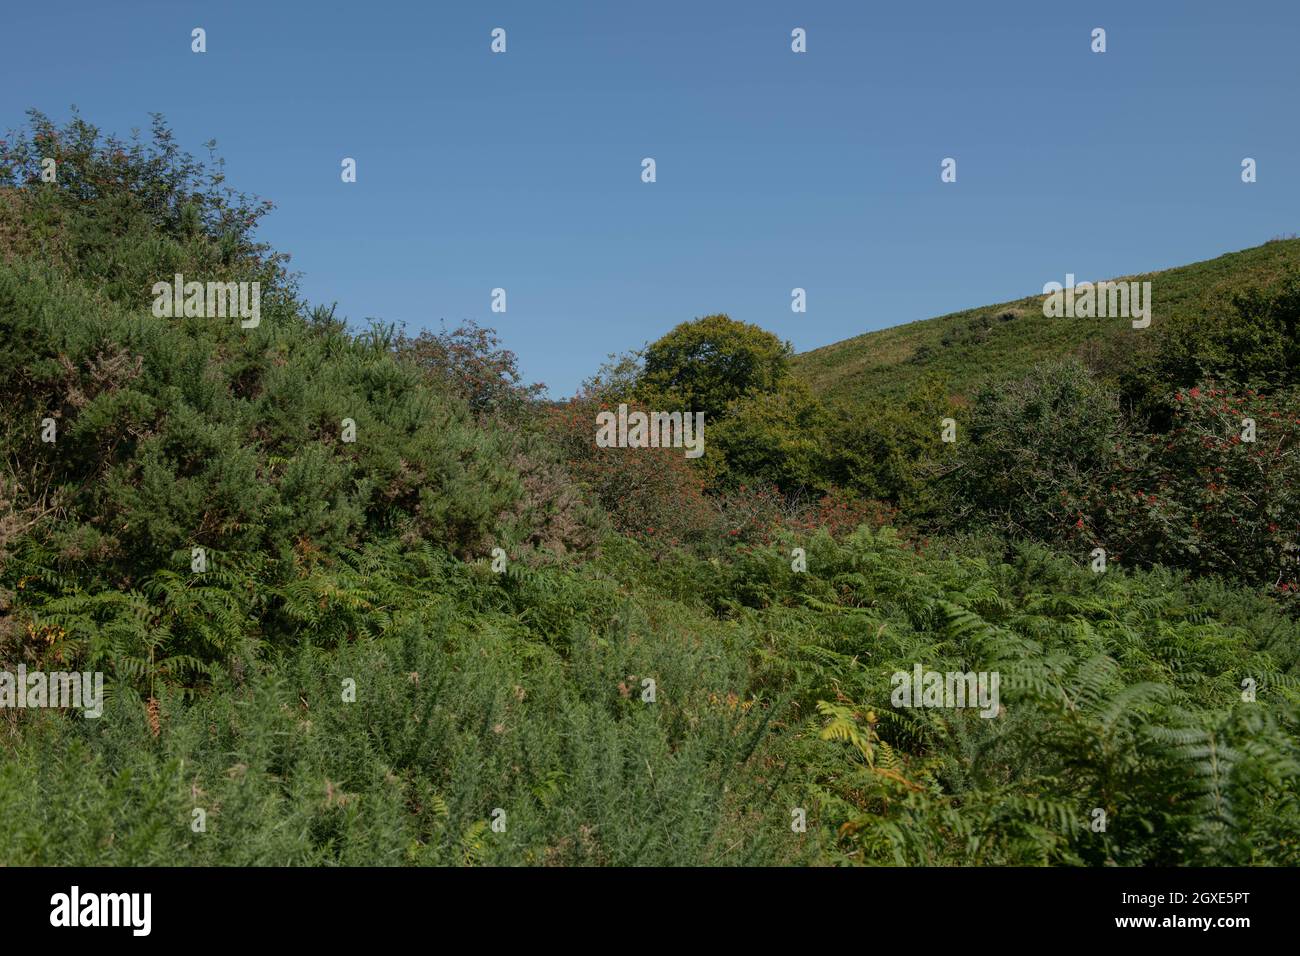 Summer Landscape of the Moorland Vegetation in the River Barle Valley within Exmoor National Park with a Bright Blue Sky Background in Rural Somerset Stock Photo